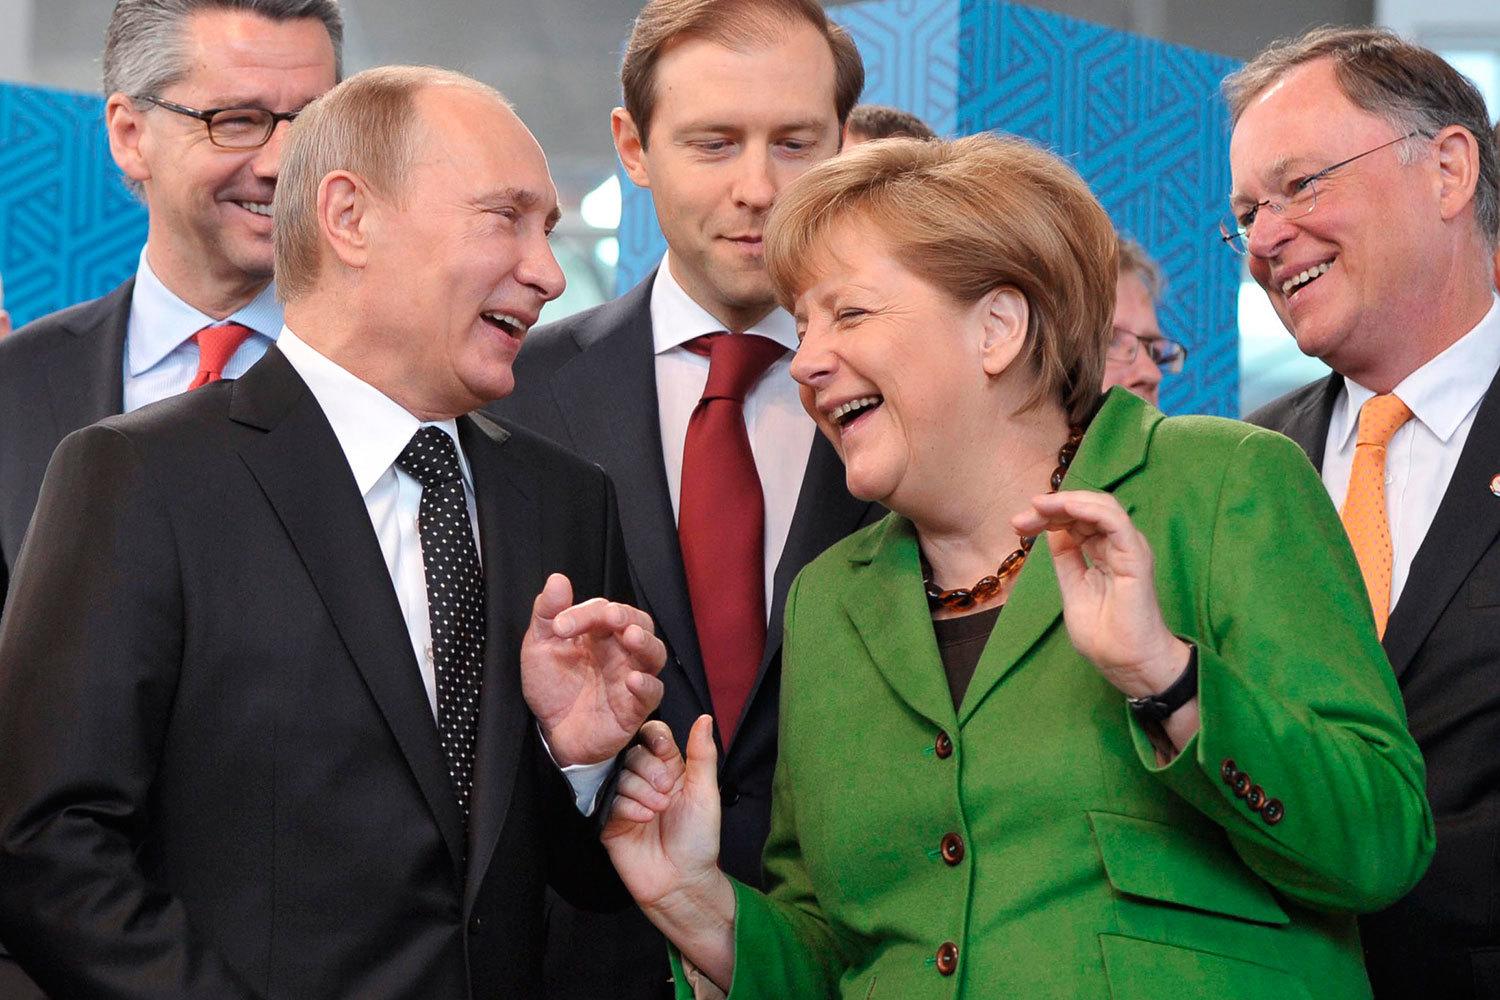 In the Bundestag, Merkel was called responsible for the war in Ukraine due to the blocking of its entry into NATO